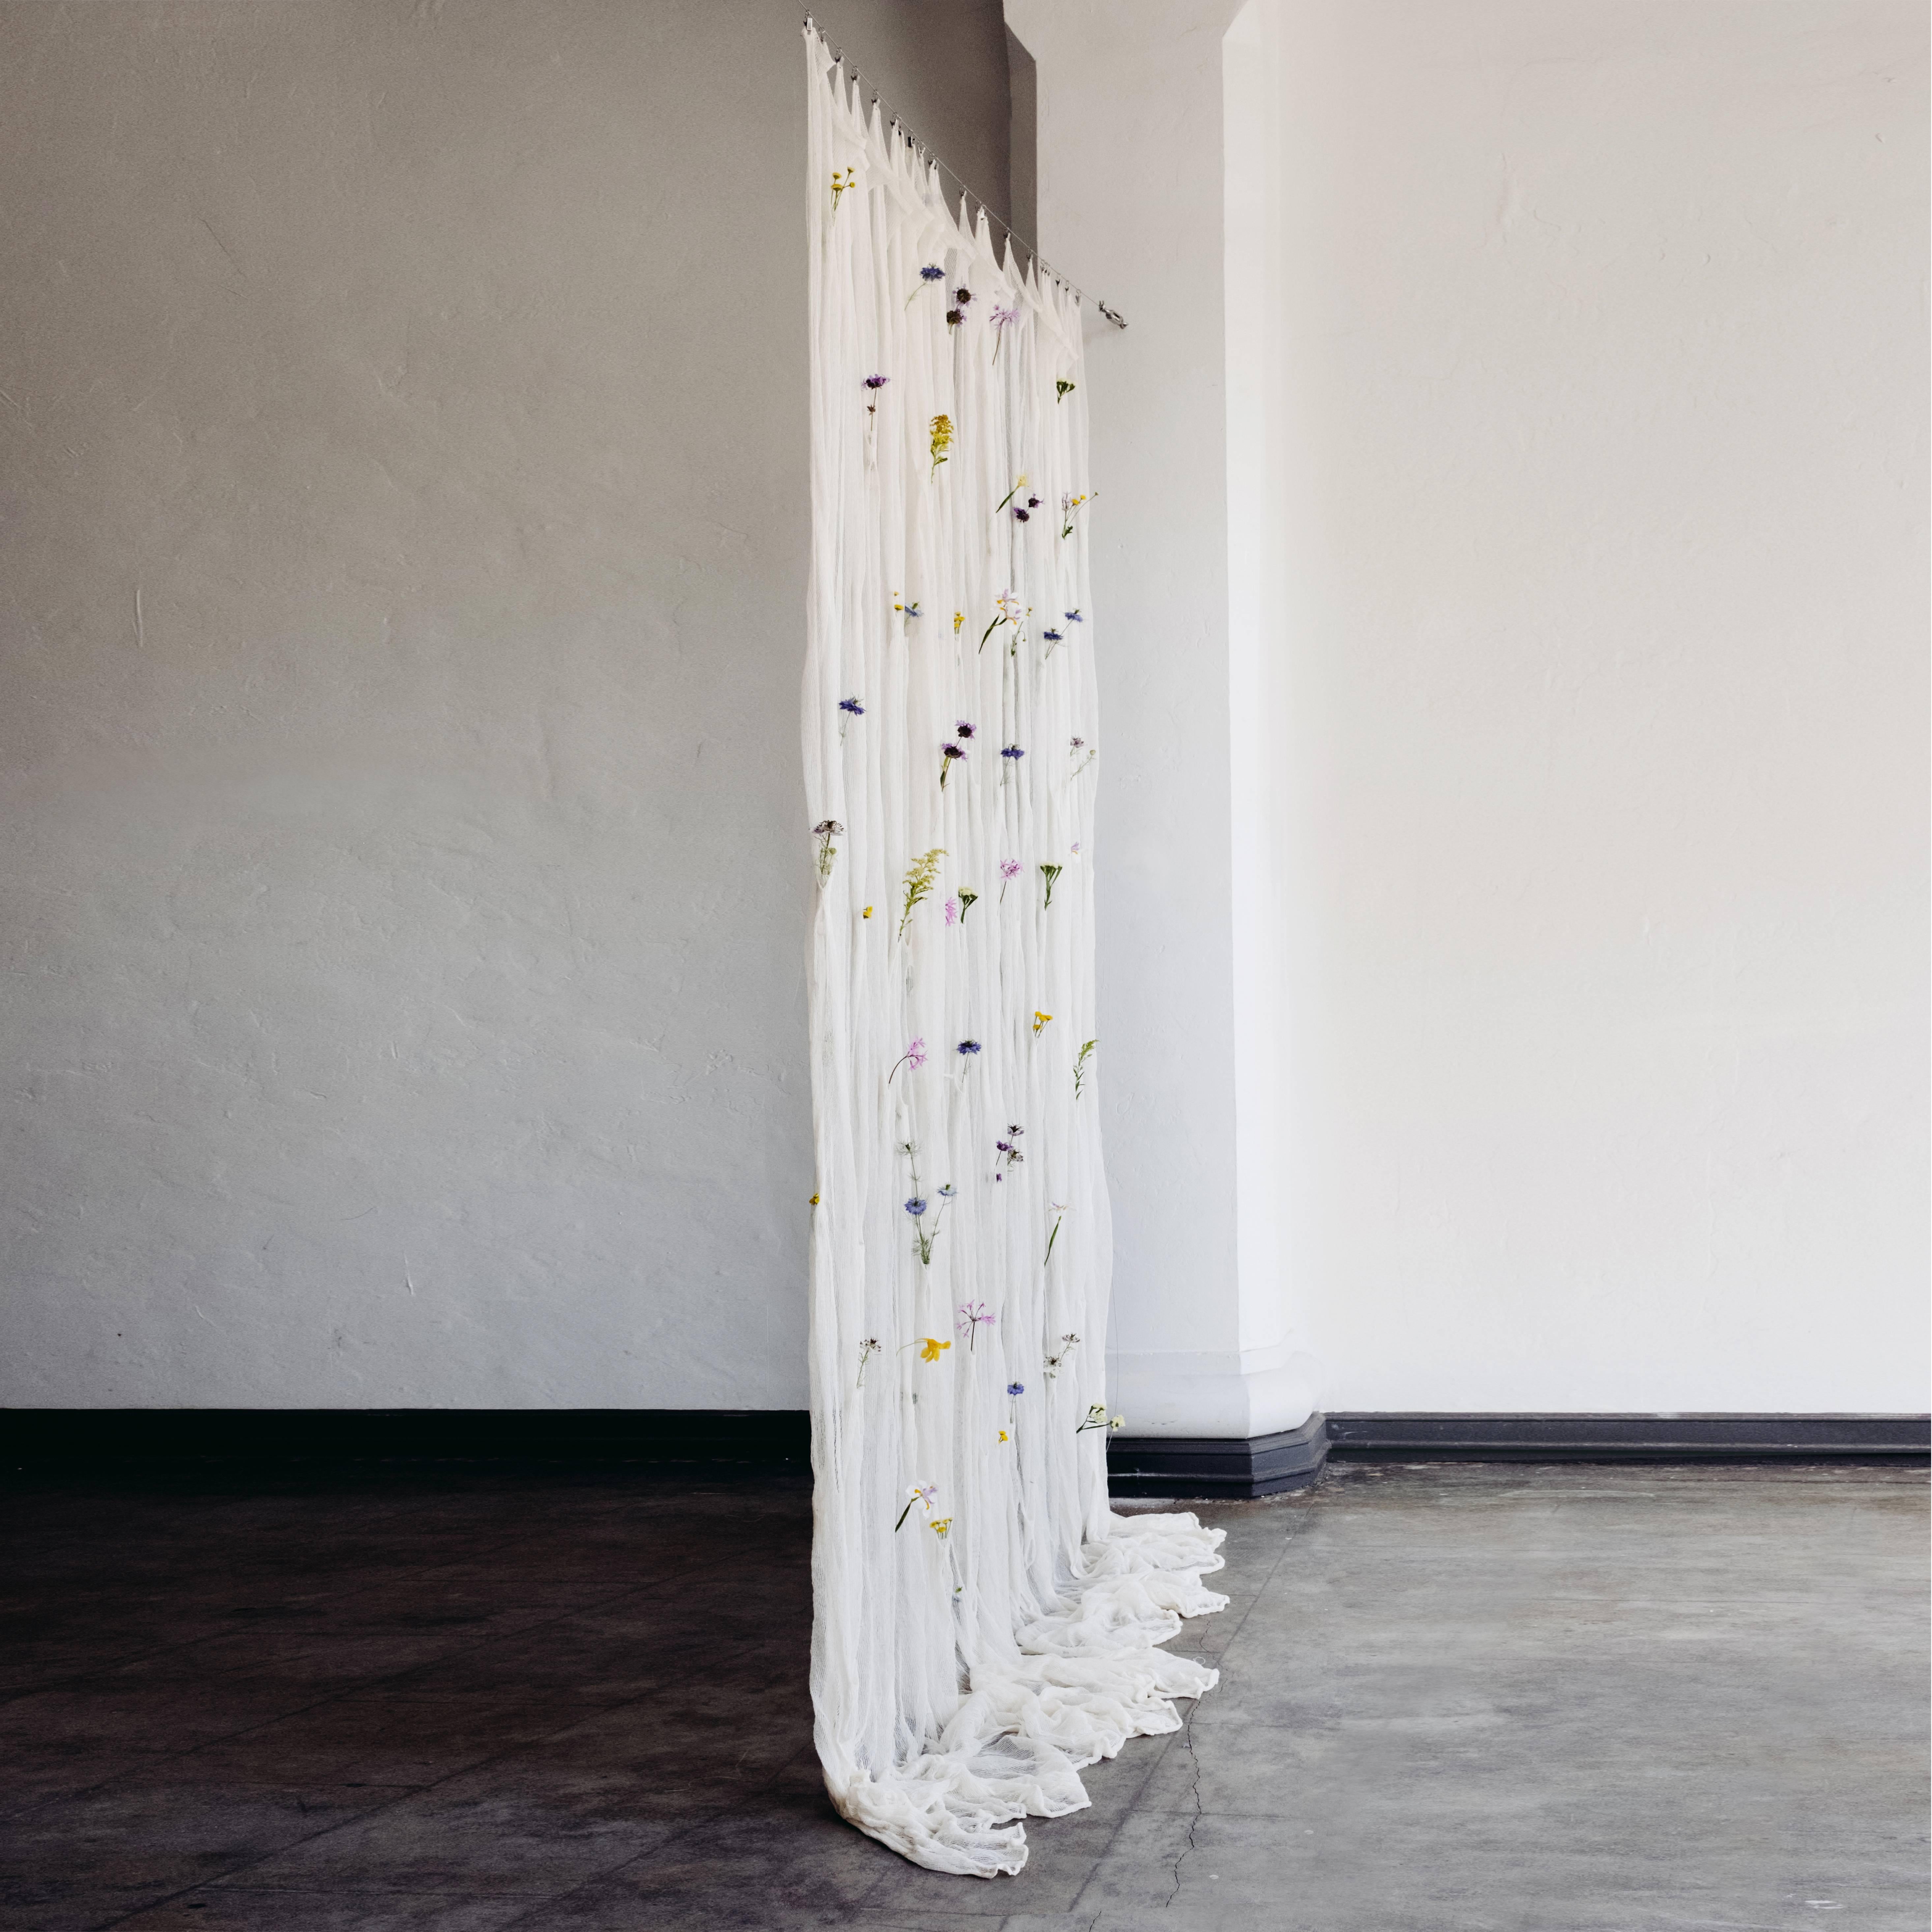 An ever-changing living vertical divider, the draped flowers curtain contains over 100 pockets where fresh flowers can be placed, transforming the space it inhabits by offering a landscape of seasonality and personal contexts.

The limited run of